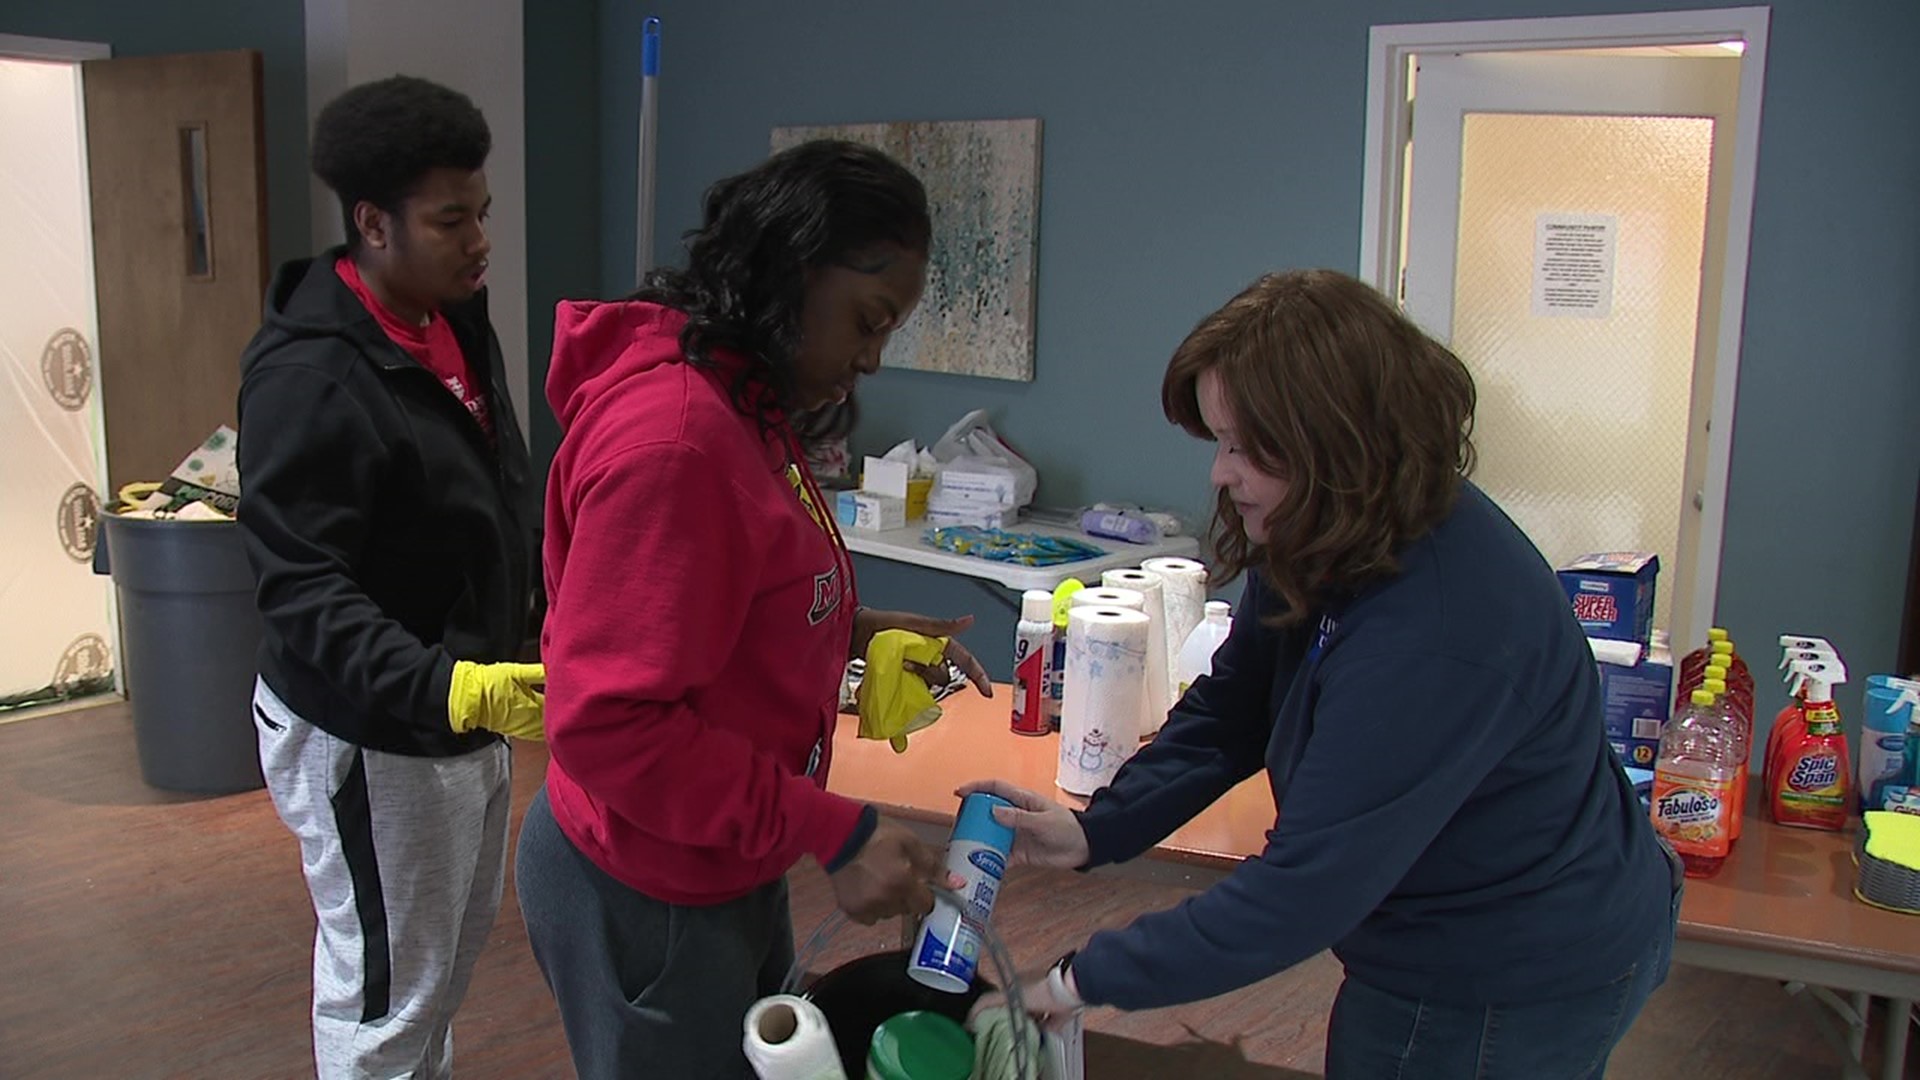 Newswatch 16's Courtney Harrison spoke with volunteers who say they're also getting something out of giving back.